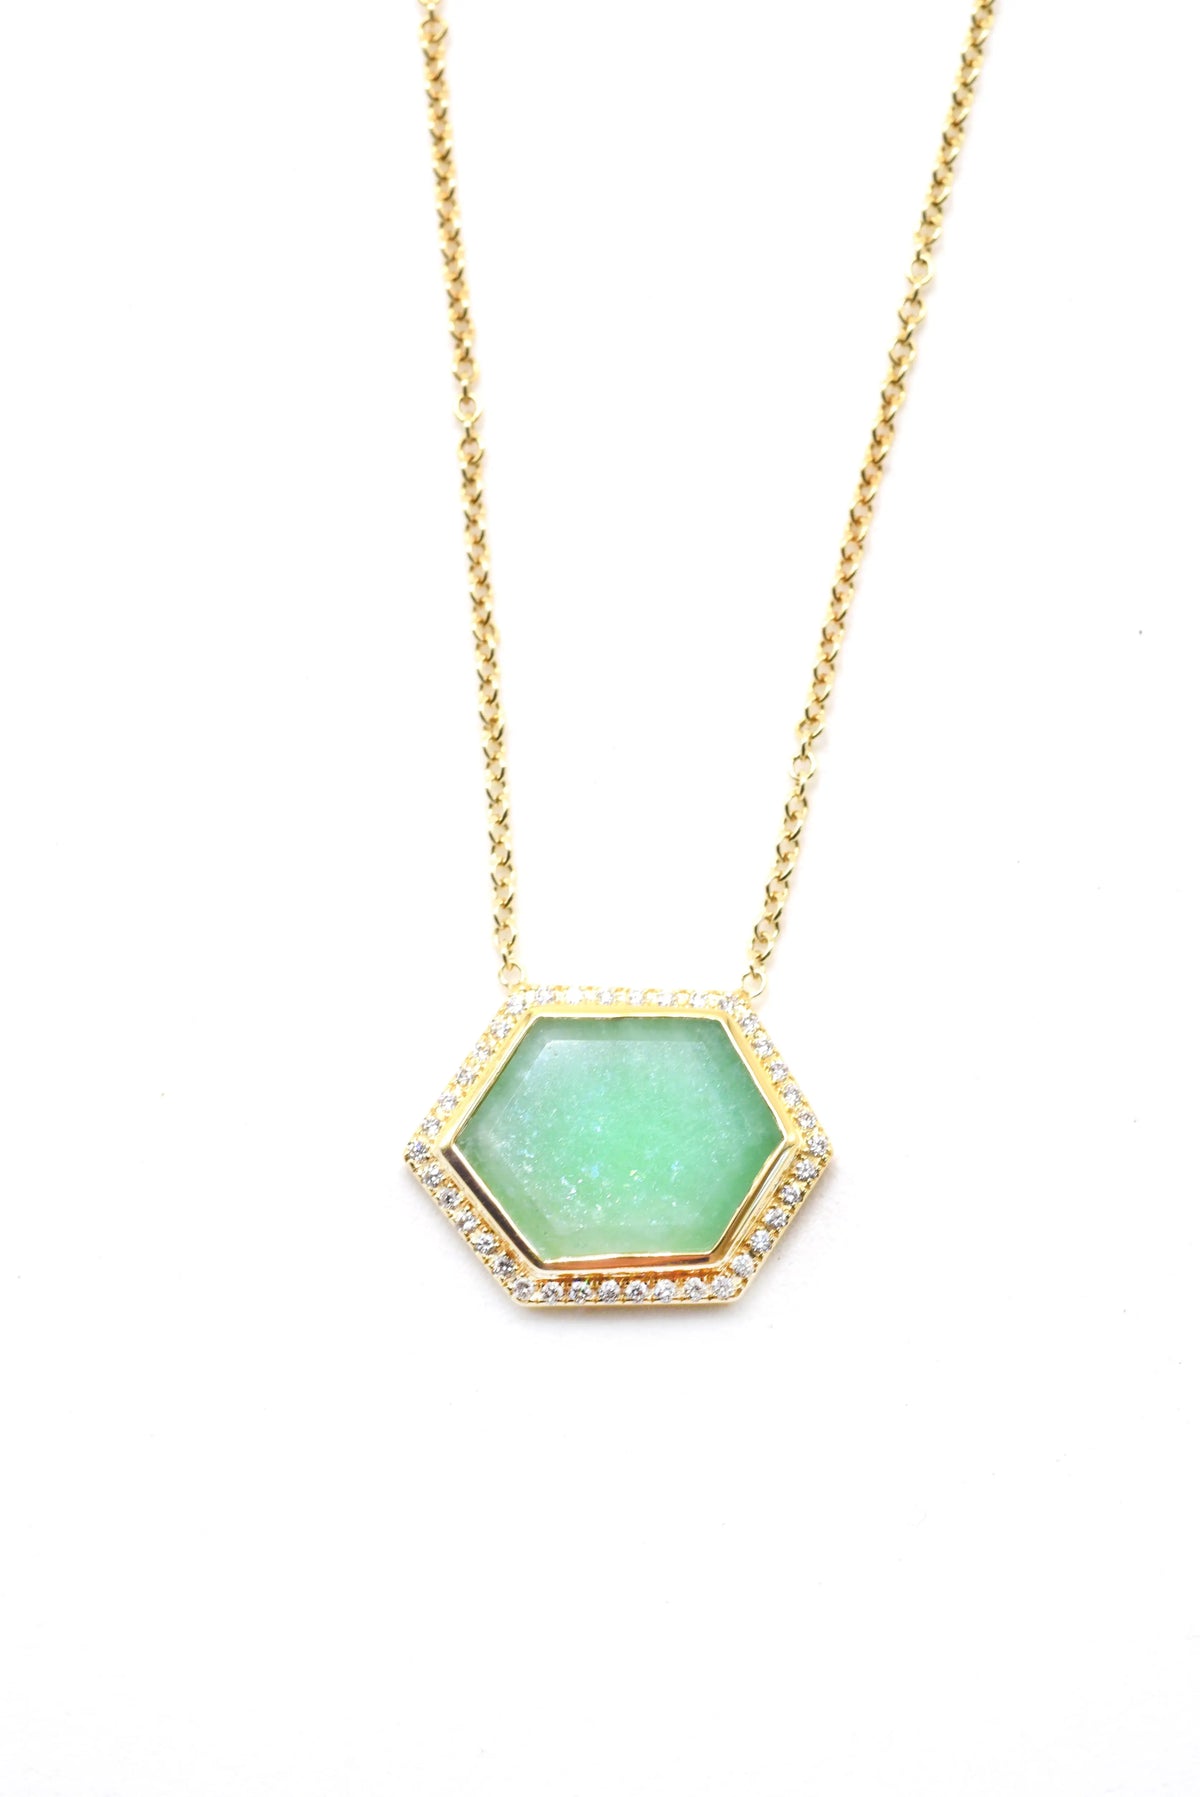 Emerald Slab Necklace with a diamond hexagon halo. The emerald slab is 6.72 cttw and the diamonds are .22 cttw. It is set in 18k yellow and is on a 18 in chain.